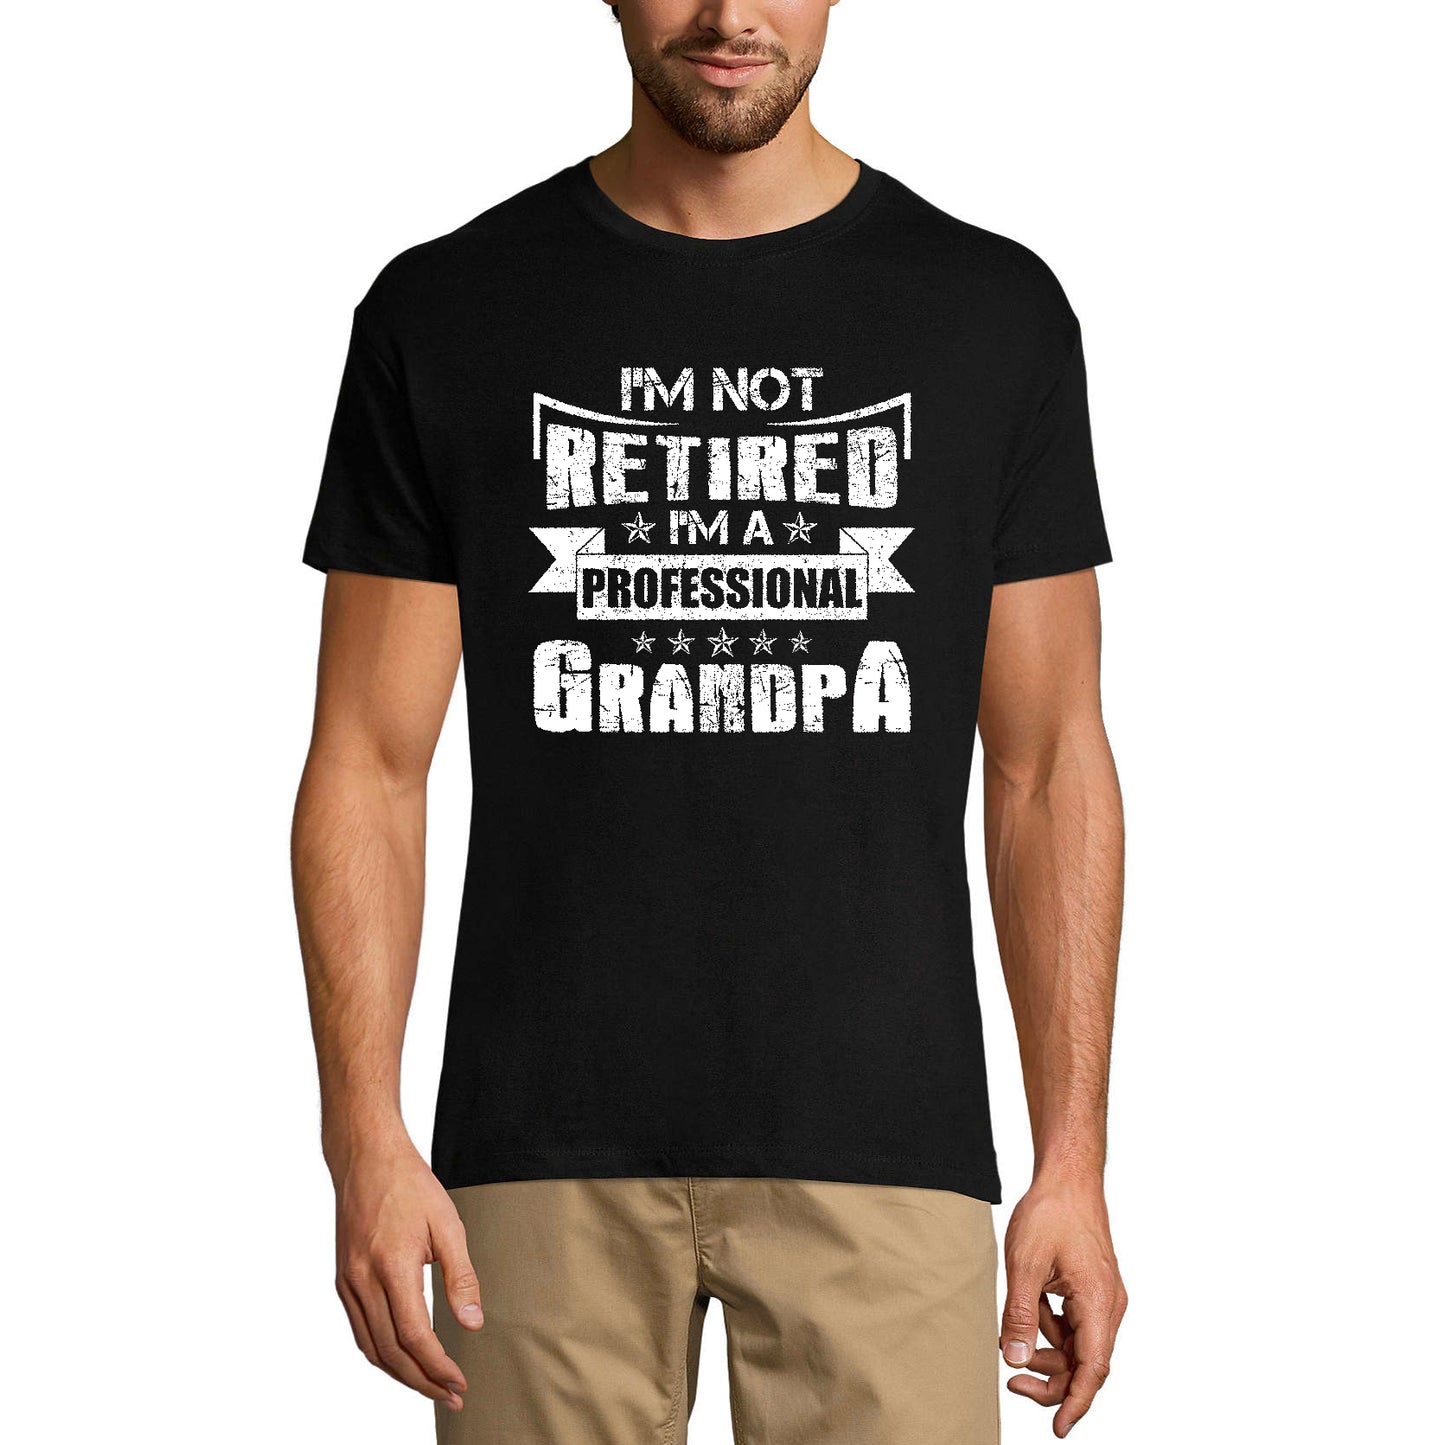 ULTRABASIC Men's Graphic T-Shirt I'm Professional Grandpa - Funny Gift For Father's Day